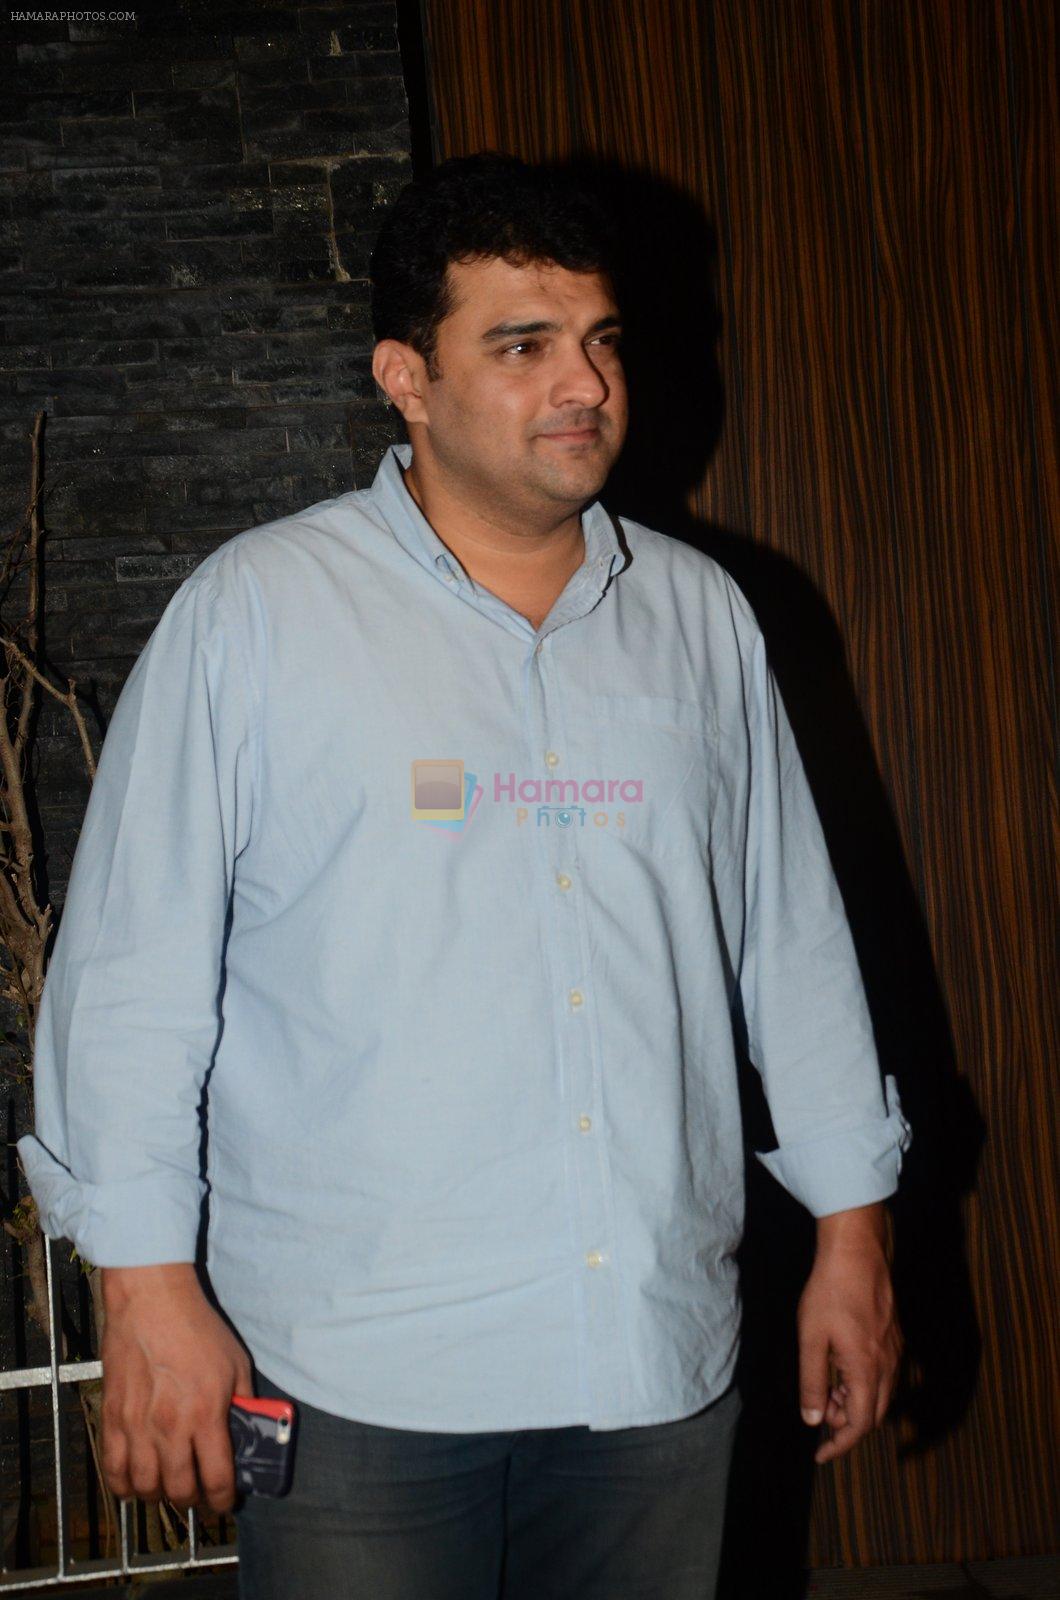 Siddharth Roy Kapoor at Aamir Khan's house on 26th July 2016